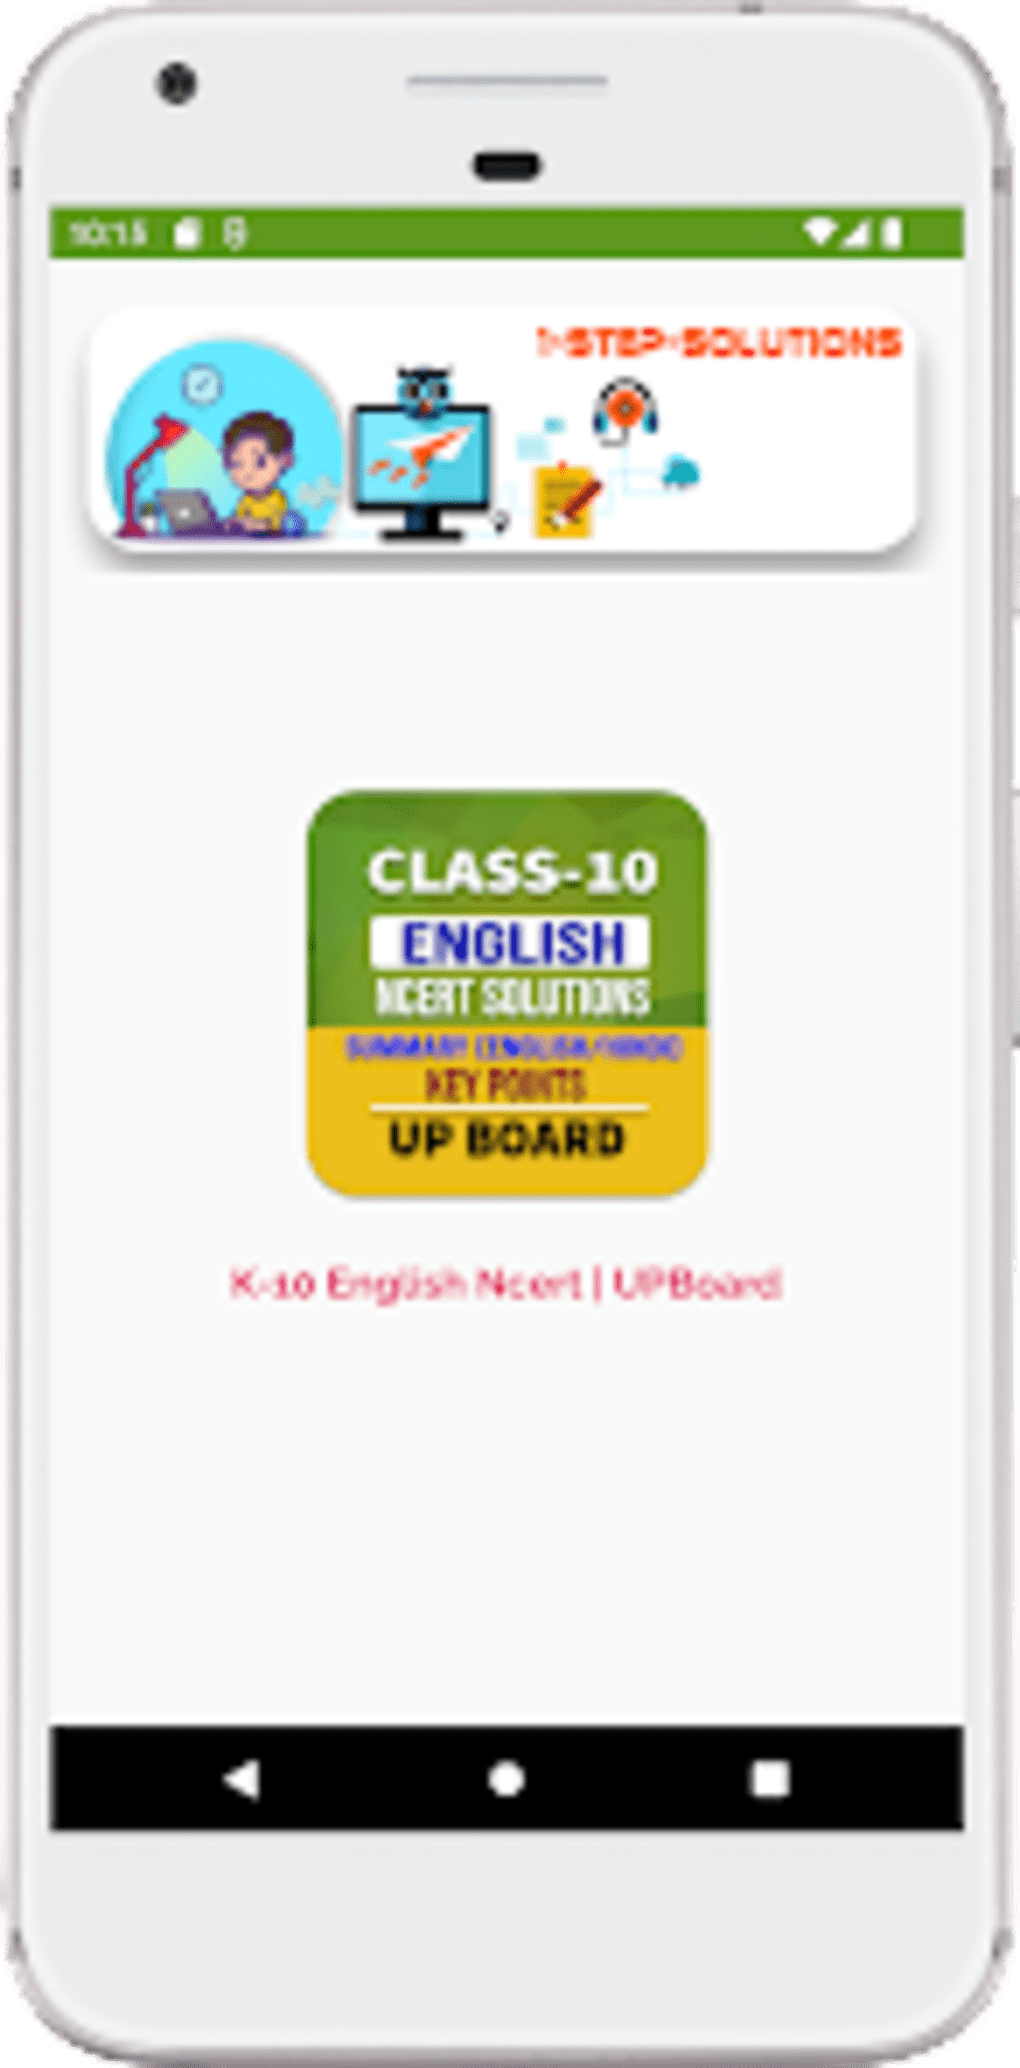 10th-class-english-upboard-for-android-download